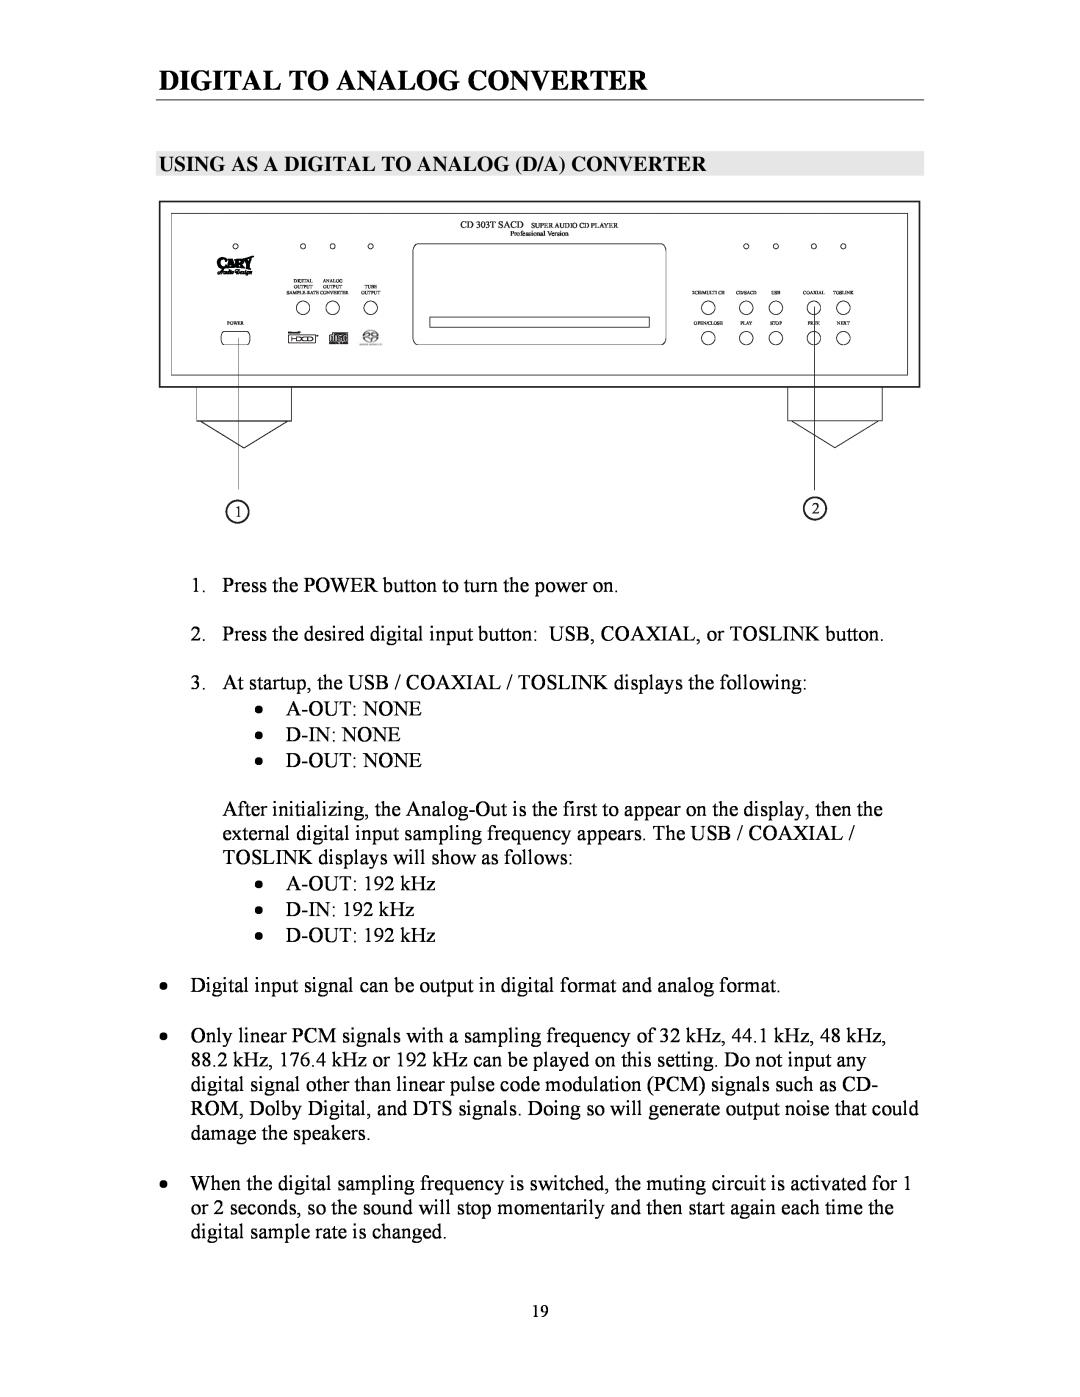 Cary Audio Design CD 303T SACD specifications Digital To Analog Converter, Using As A Digital To Analog D/A Converter 